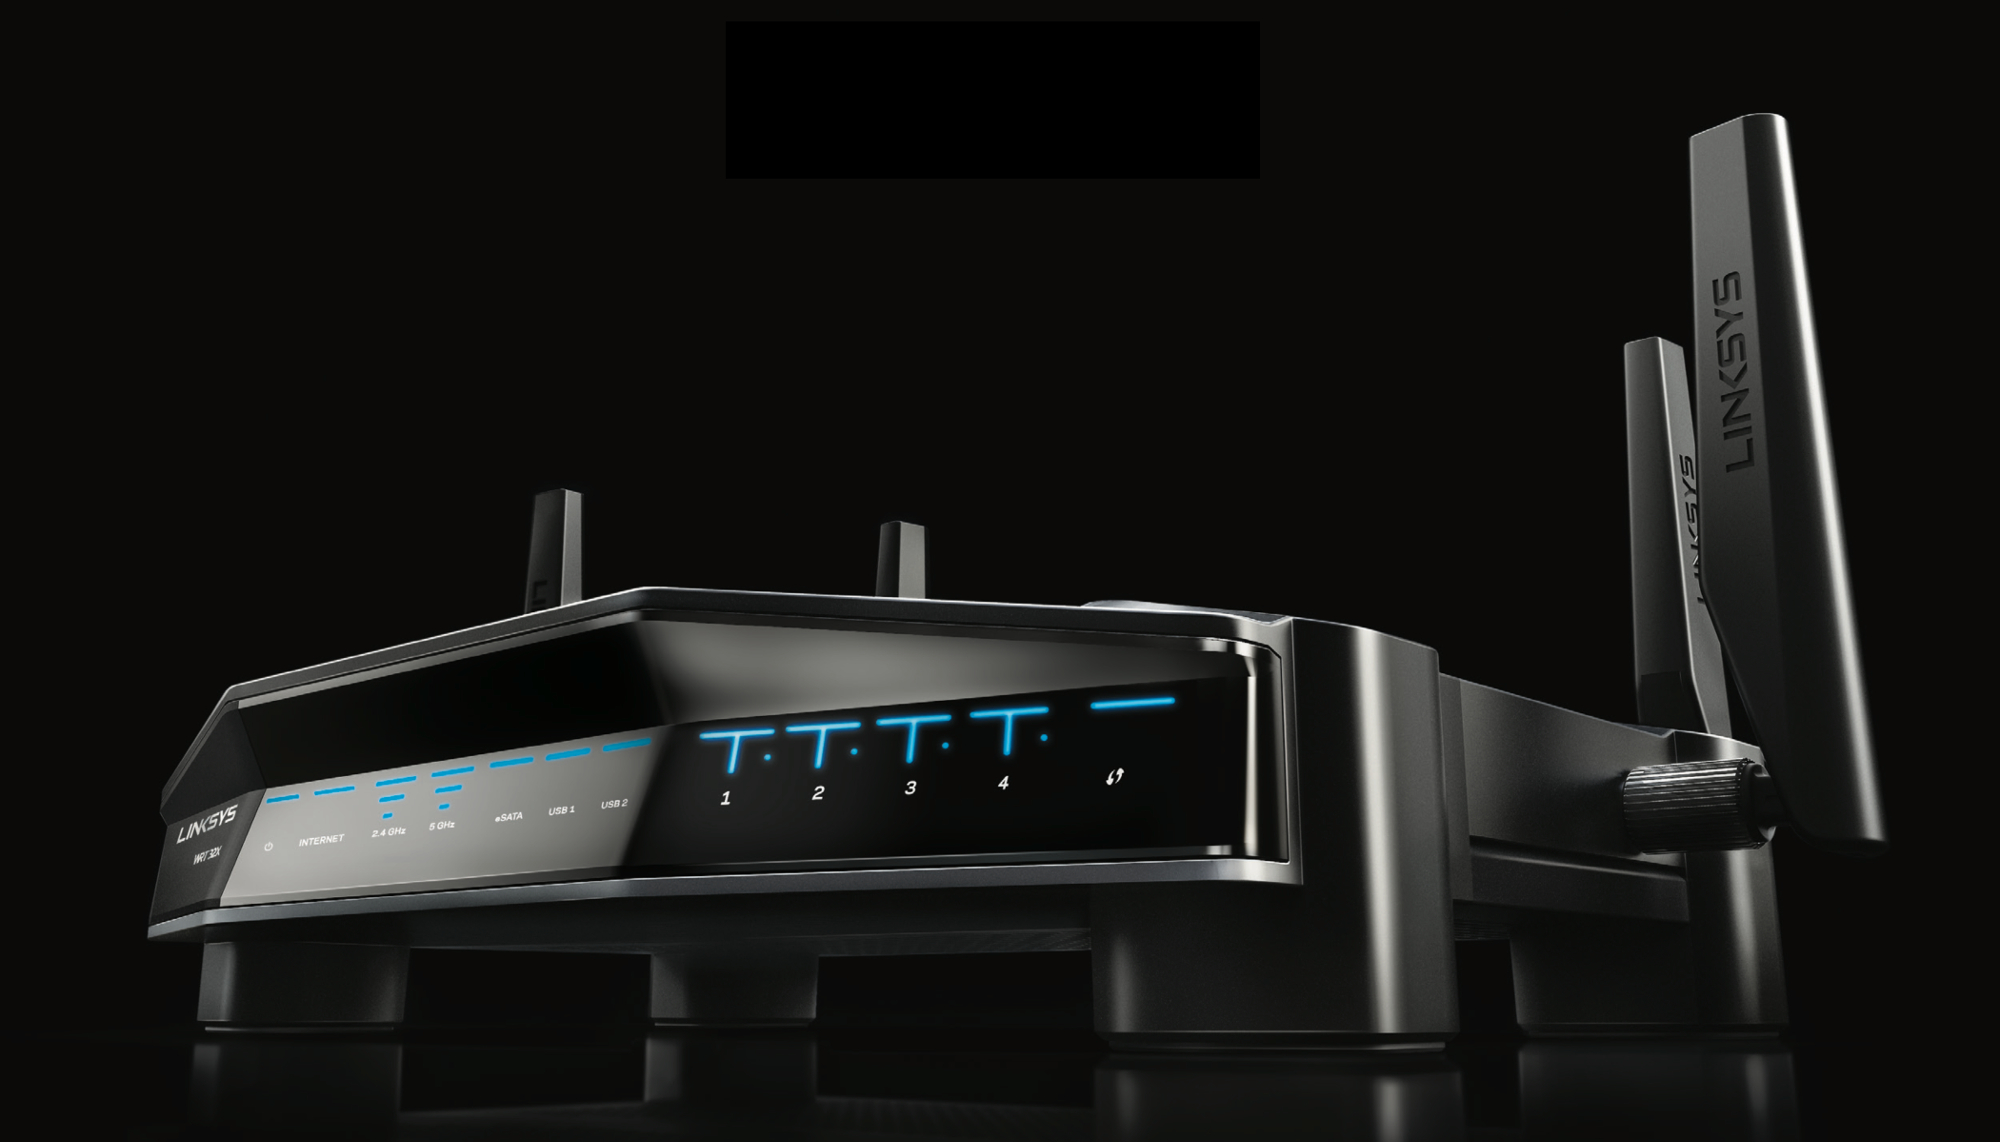 Linksys Announces WRT32X Gaming Router with Killer Prioritization Engine